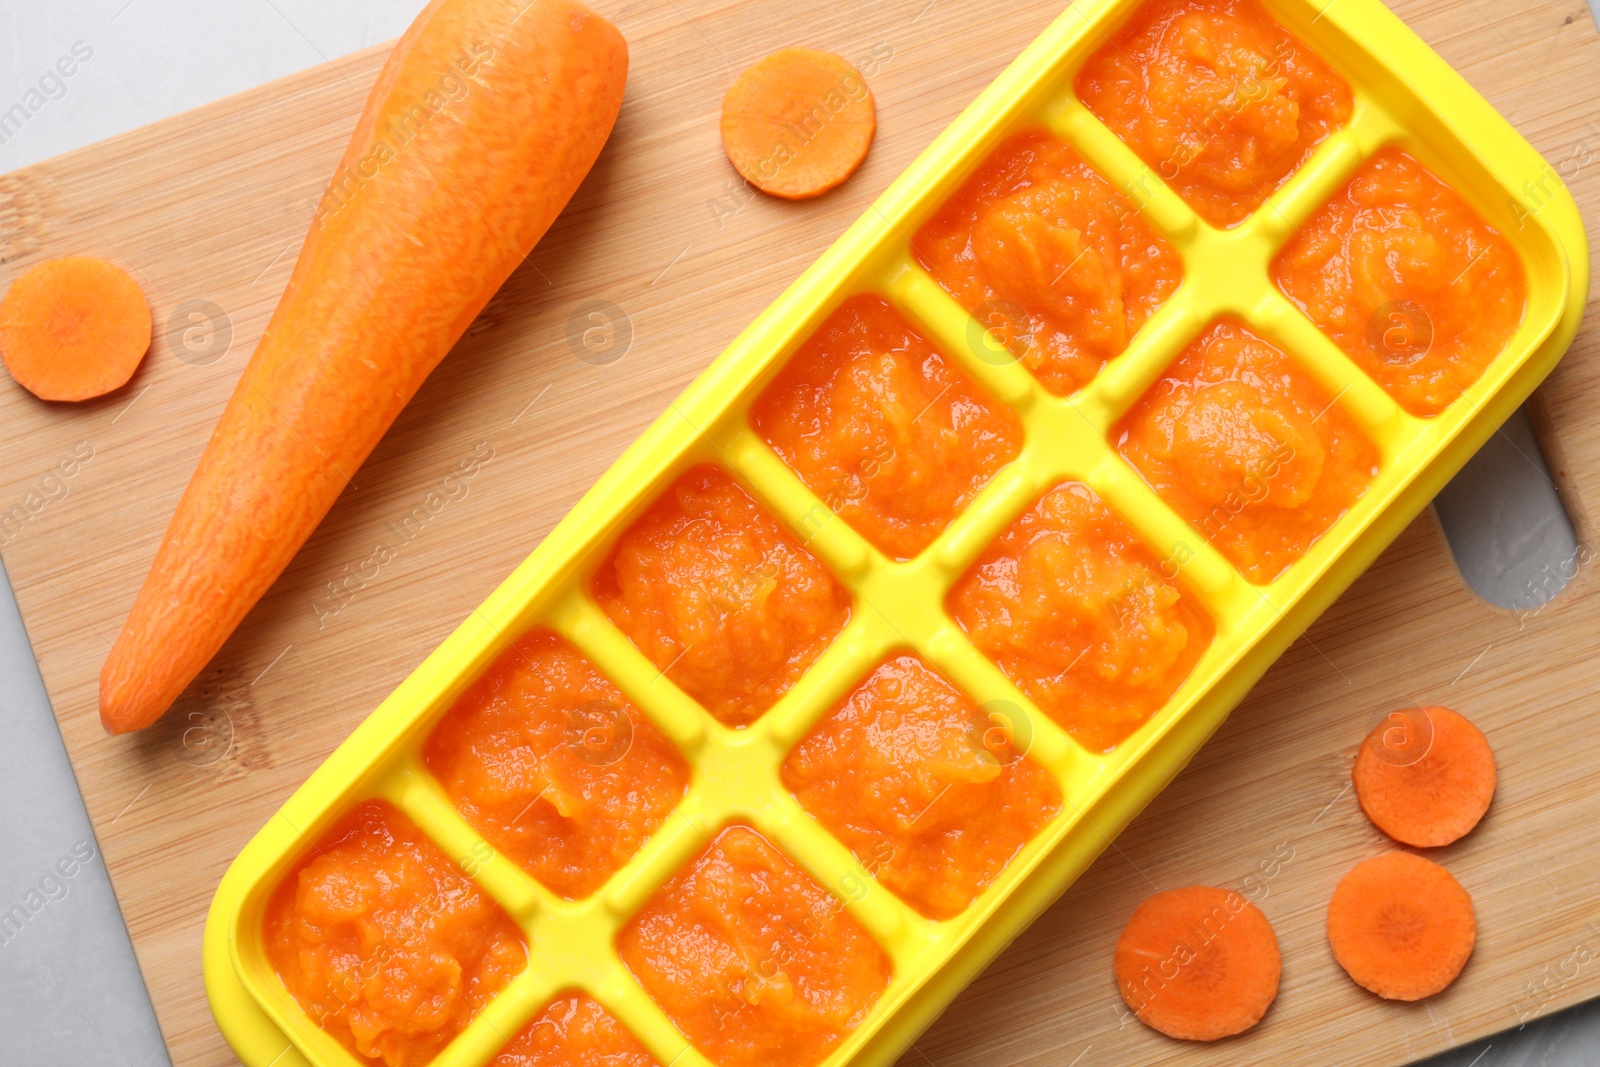 Photo of Carrot puree in ice cube tray on wooden board, flat lay. Ready for freezing